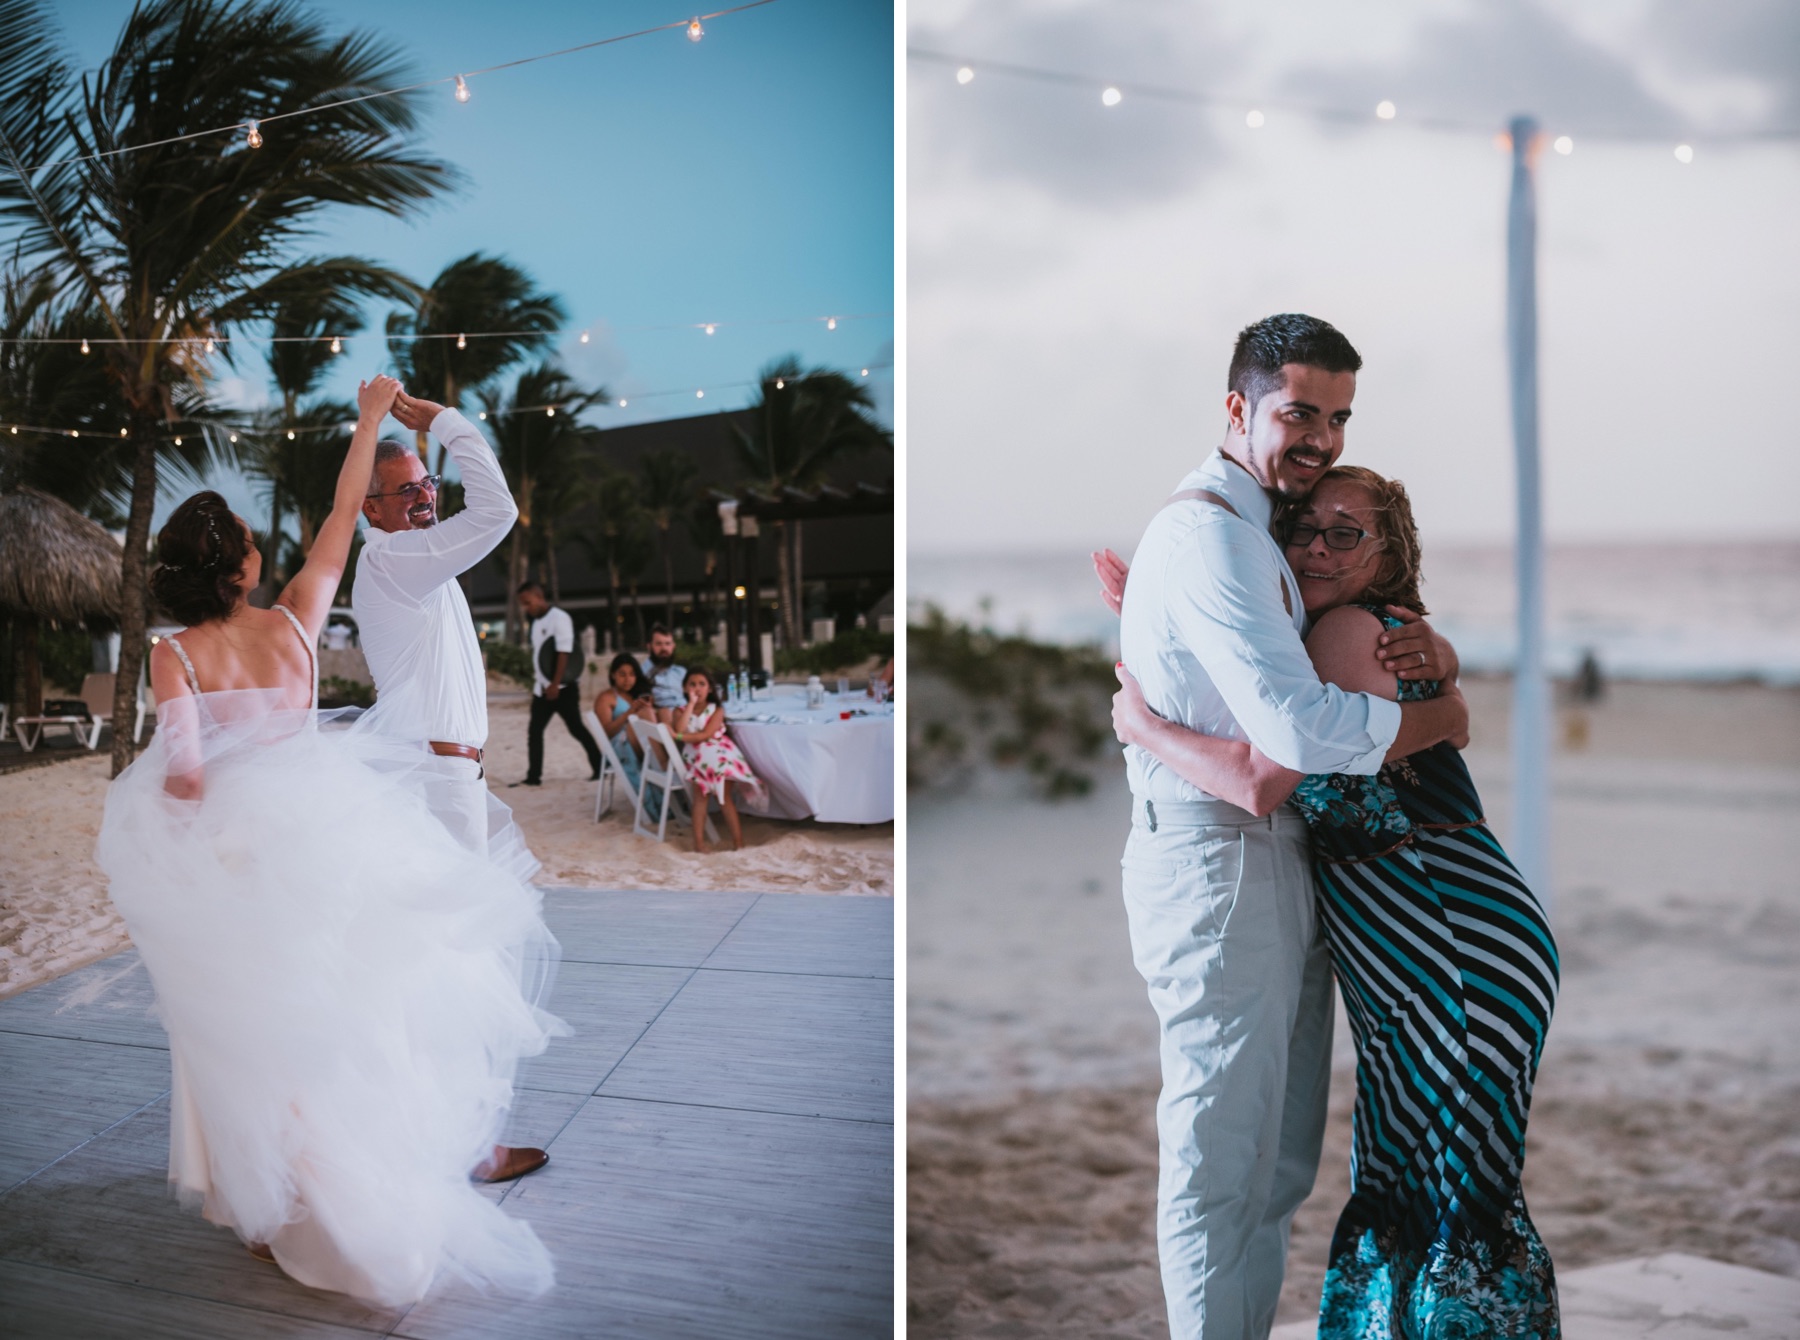 Side by side photos of mother son and father daughter dance at wedding